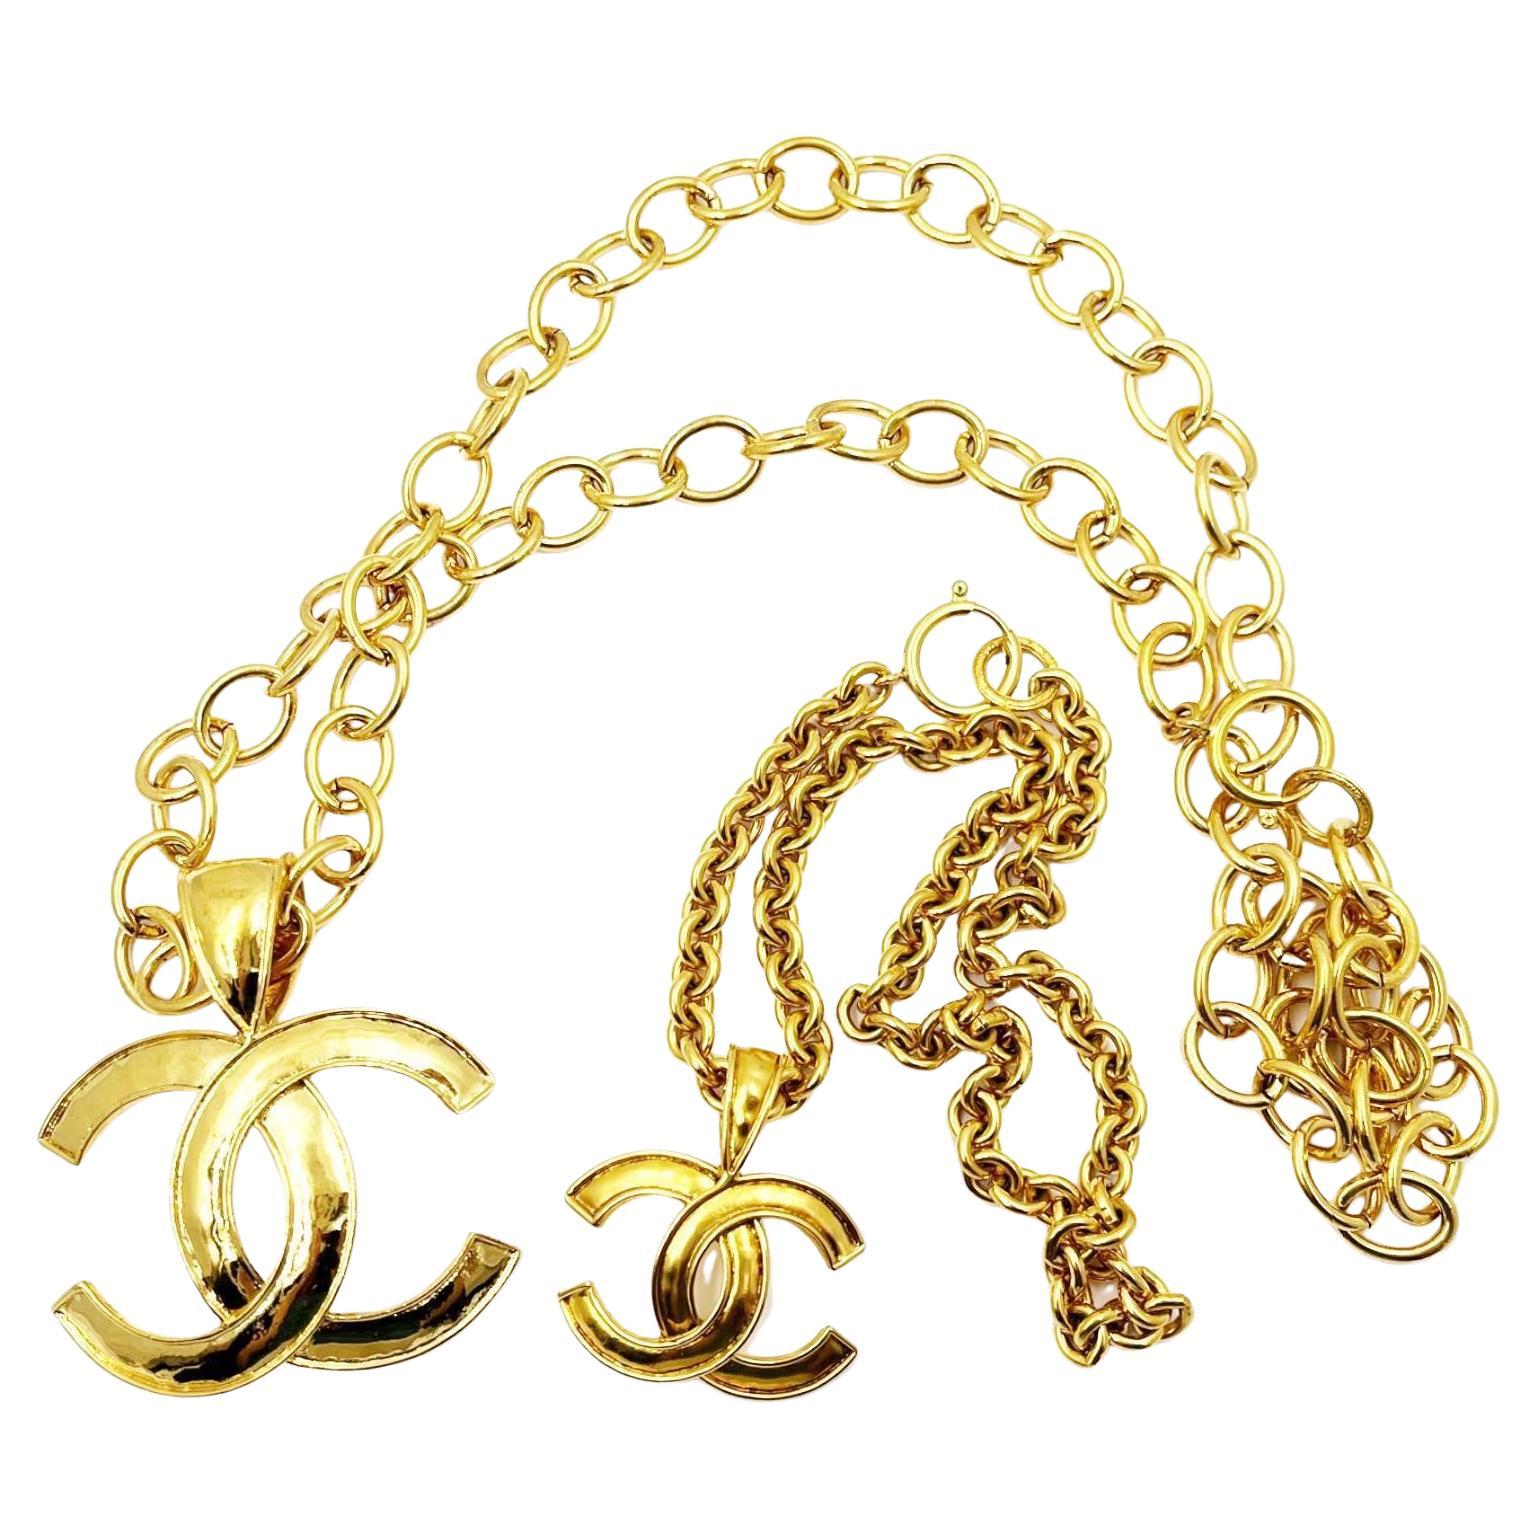 Chanel 2 Vintage Gold Plated CC Big Small Pendant Necklaces Set